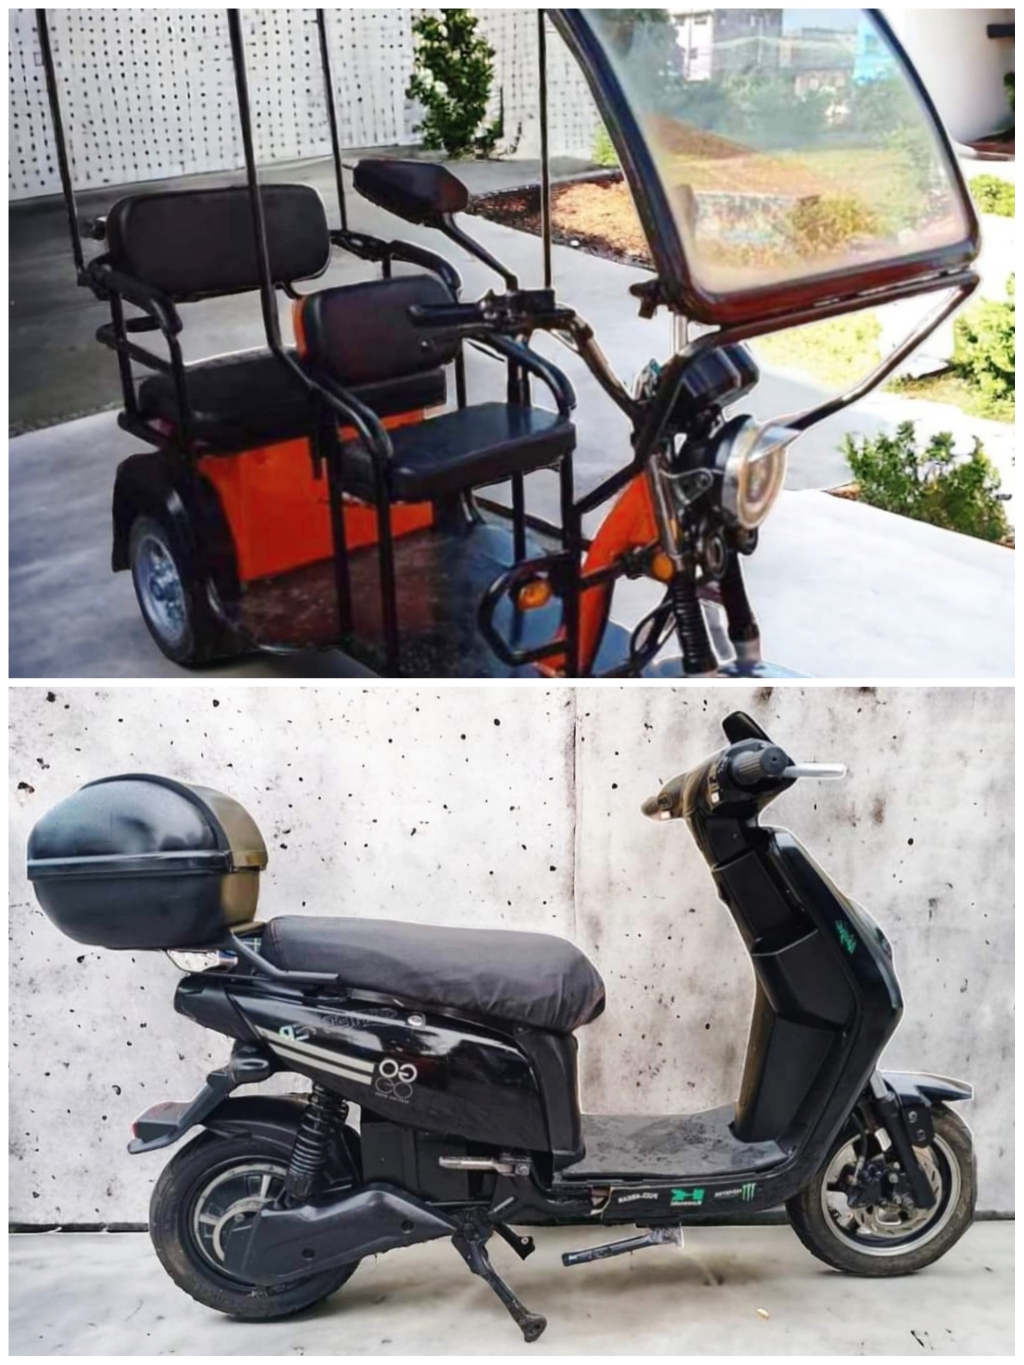 LTO is pushing the registration and driver’s license specifically for e-bikes and e-trikes